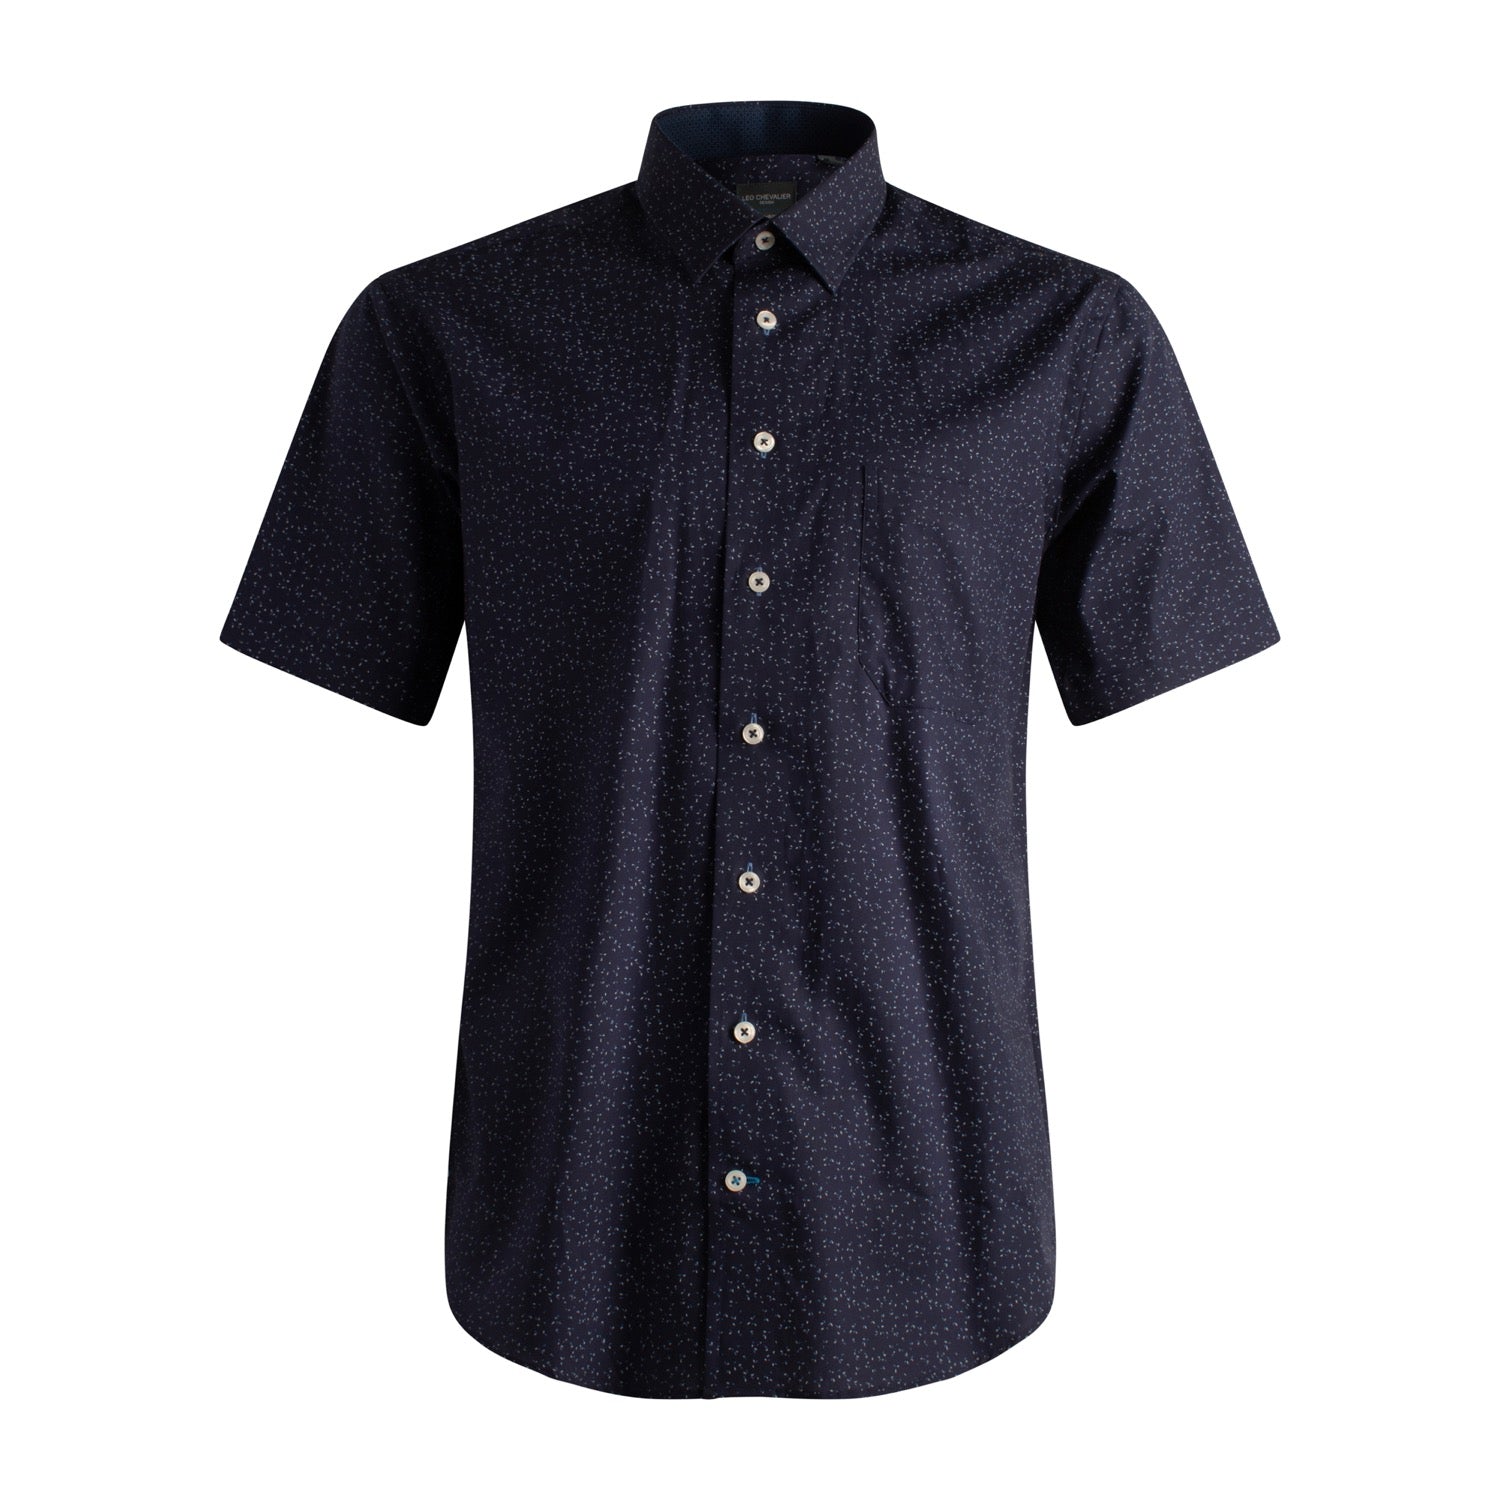 Navy Firework Neat Print Short Sleeve No-Iron Cotton Sport Shirt with Spread Collar by Leo Chevalier